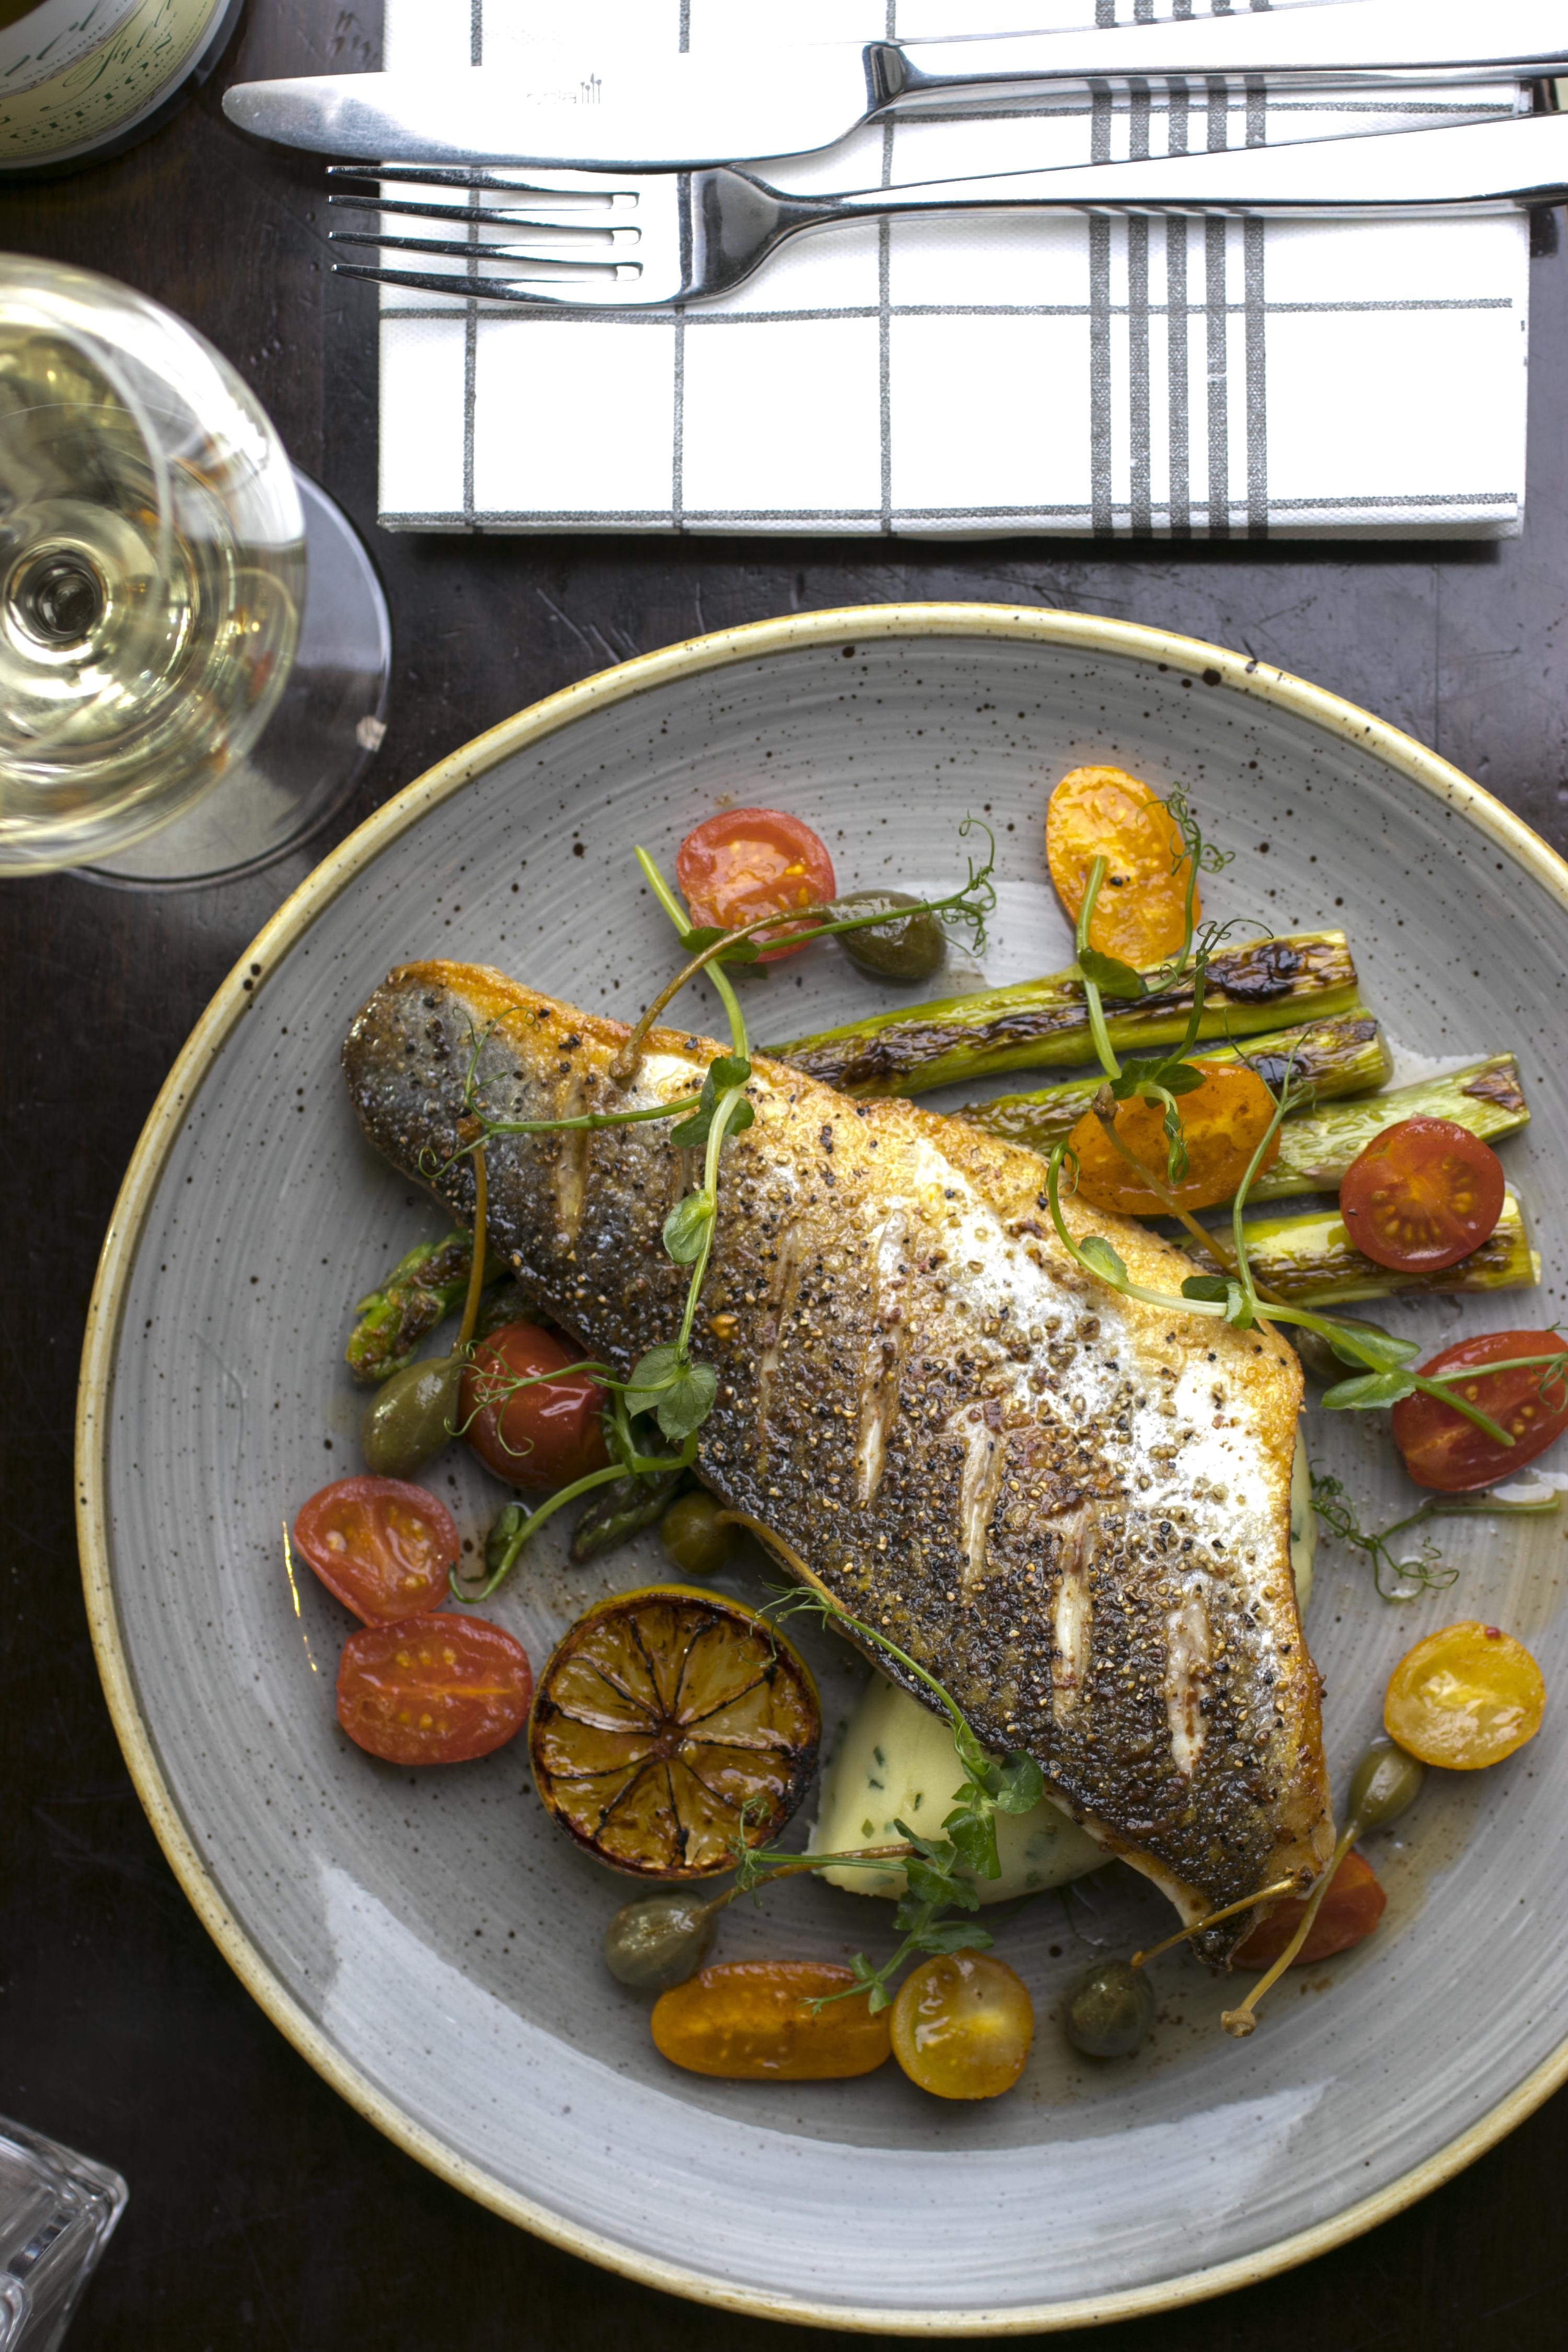 Pan-fried Fillet of Hake, grilled asparagus, heirloom cherry tomato and capers dressing 